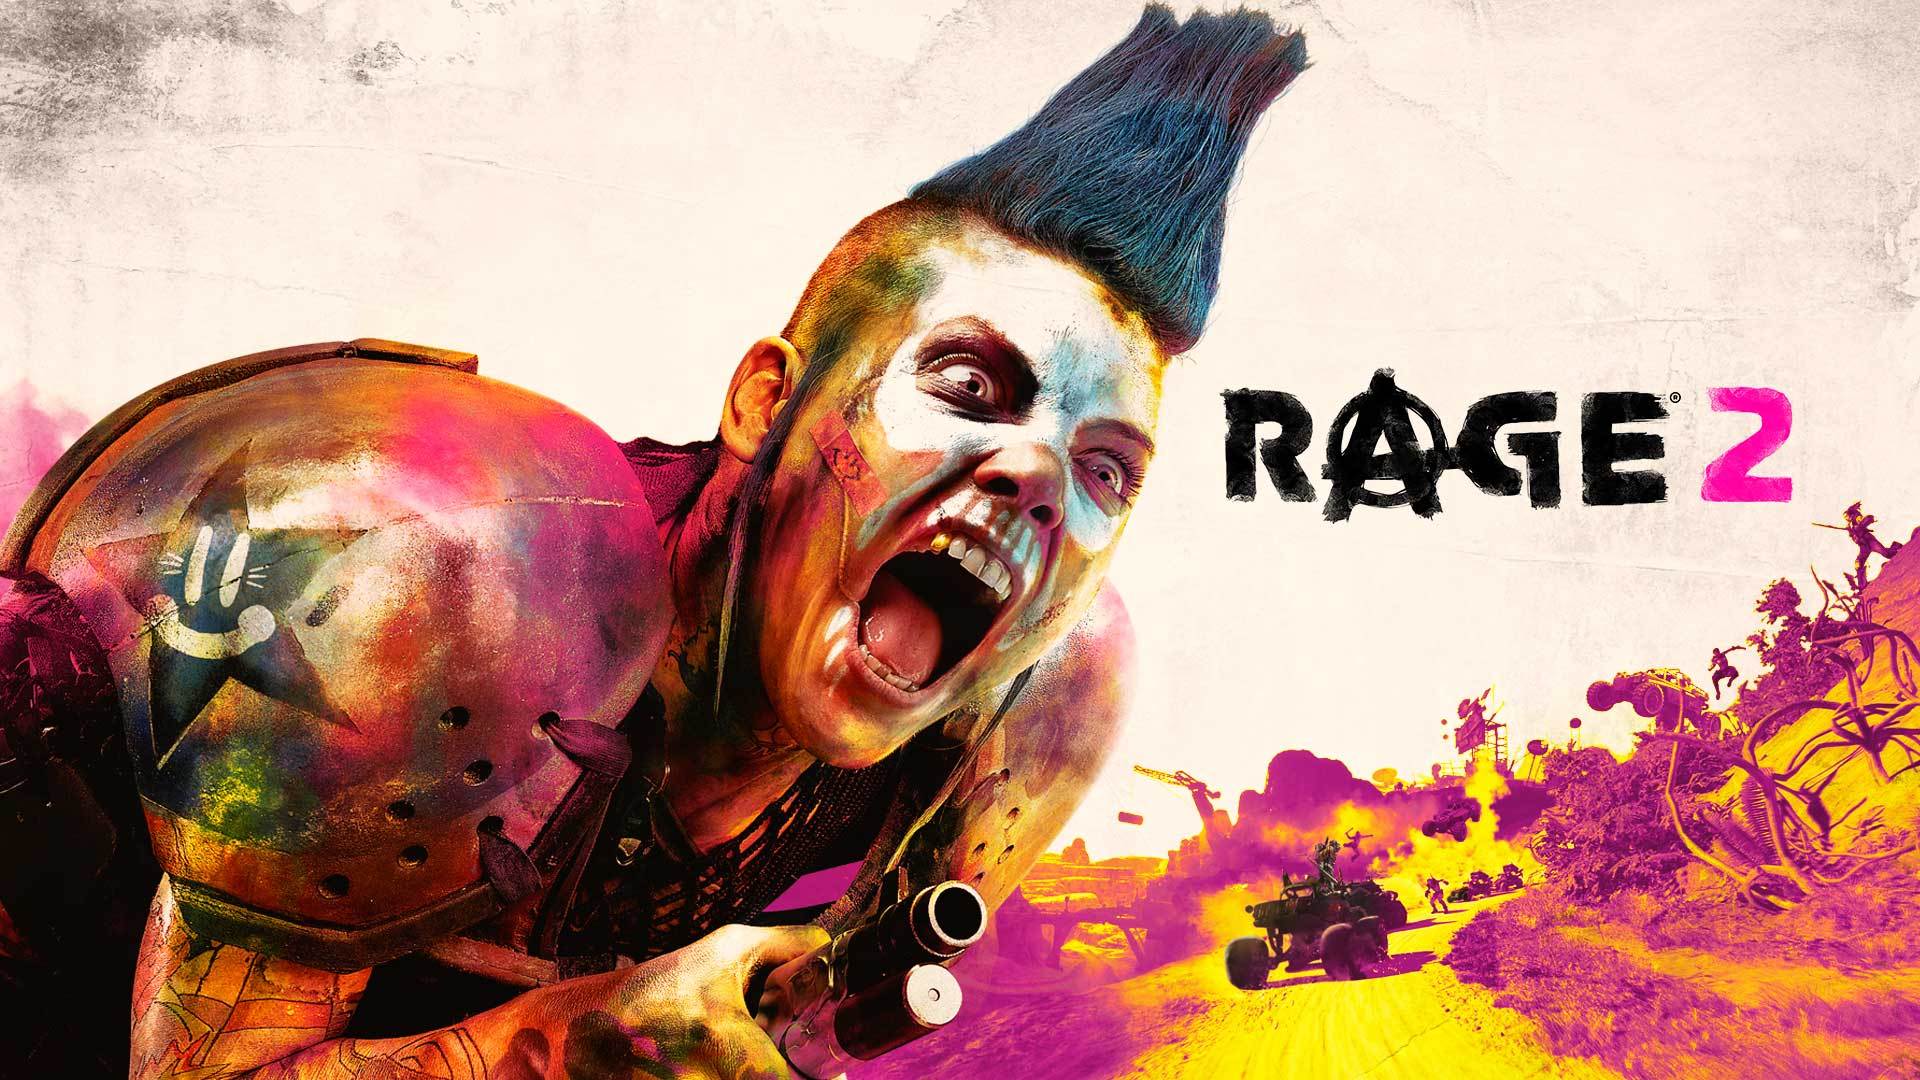 The Daily Crate | Gaming: Rage 2: Sometimes a Soldier with no Soul?